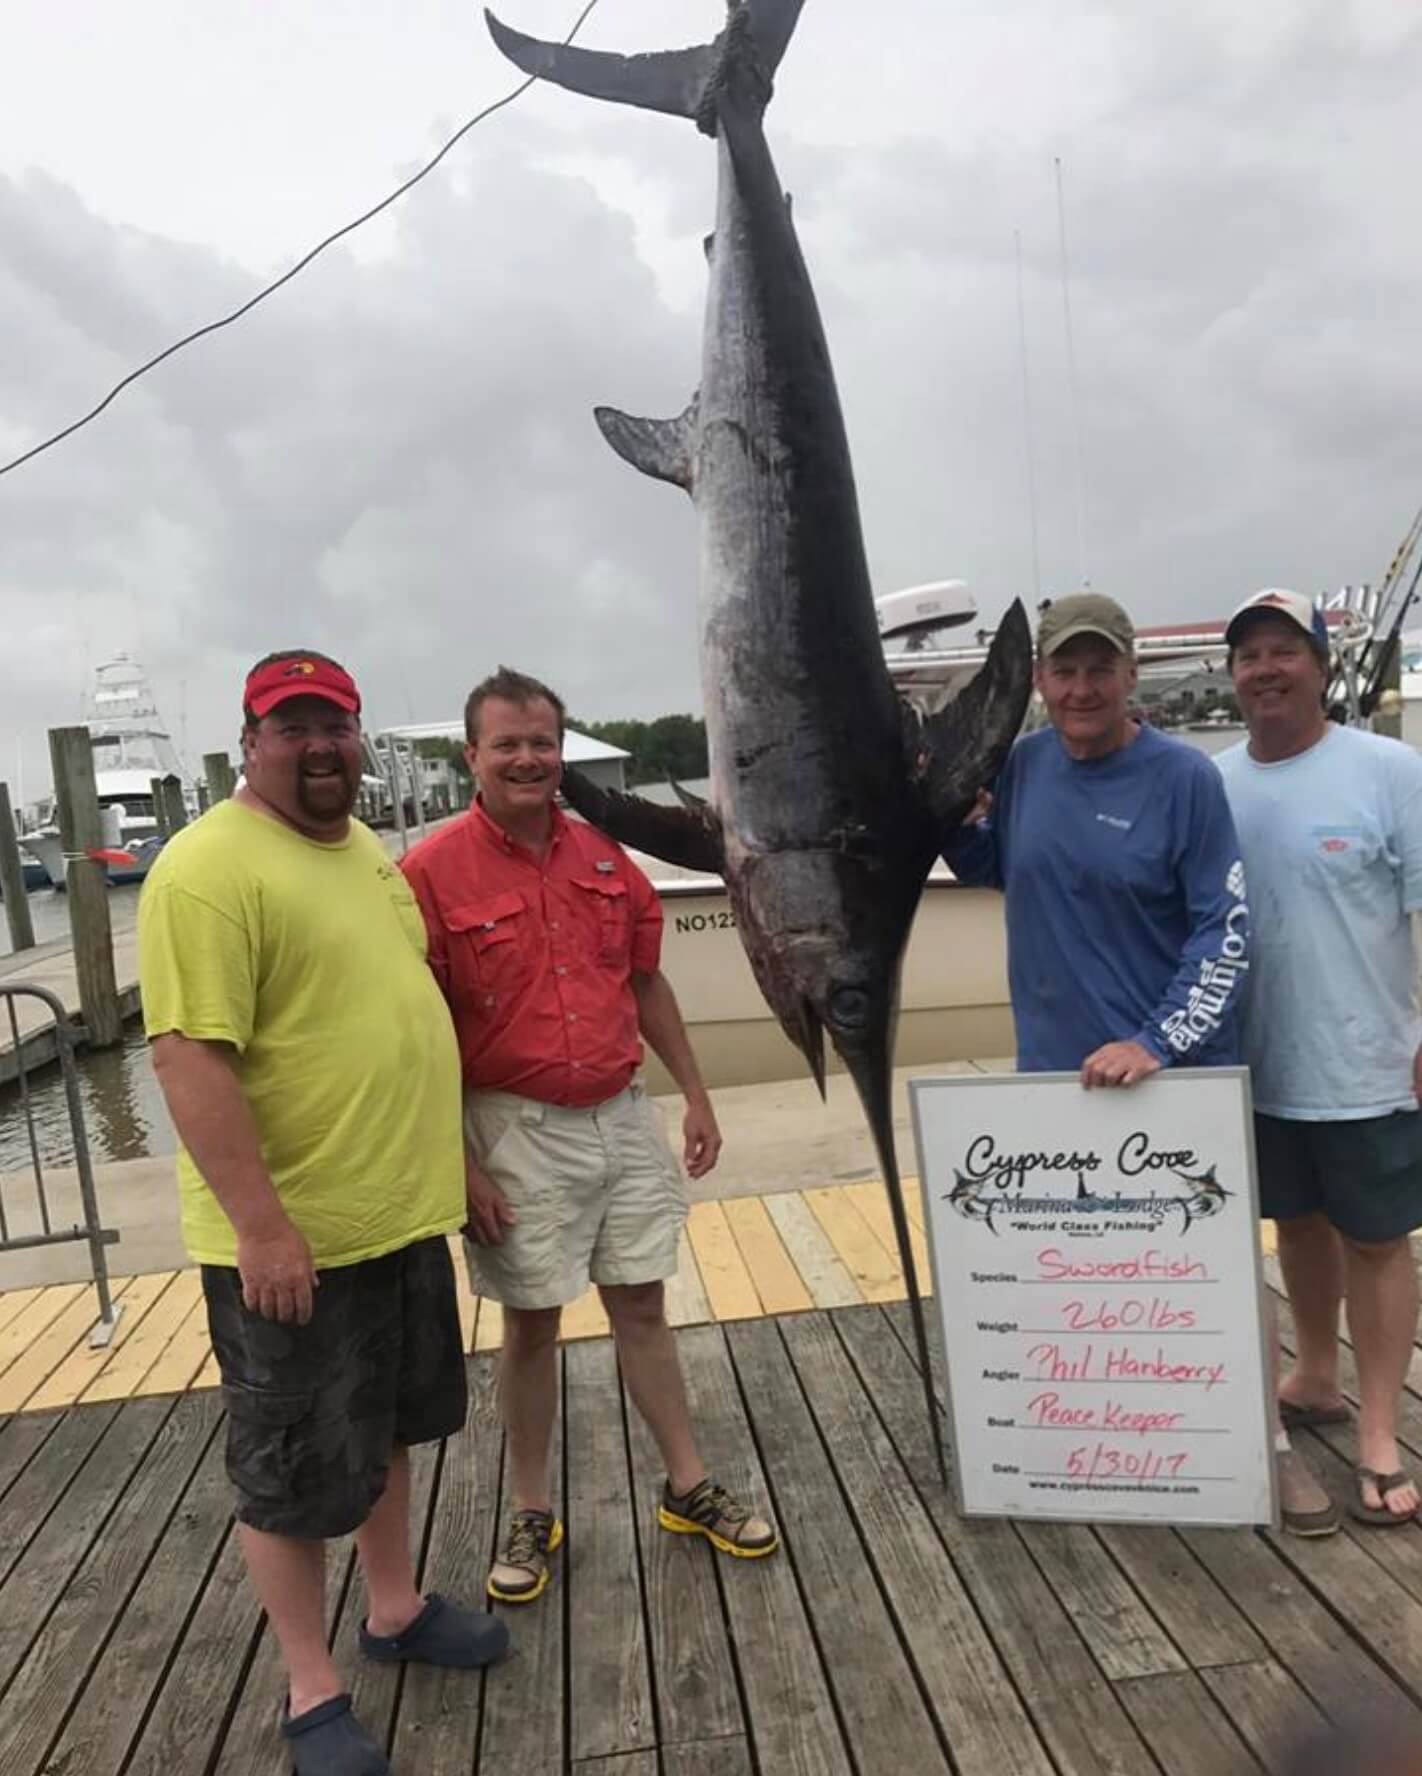 2nd place yellowfin tuna, 2nd and 3rd blackfin tuna (all pogies), 2nd and 3rd place almaco jacks (squid) - Barkley Sims, Flora Bama Fishing Rodeo. #5 state record swordfish Louisiana, peace marvel 260LBS.